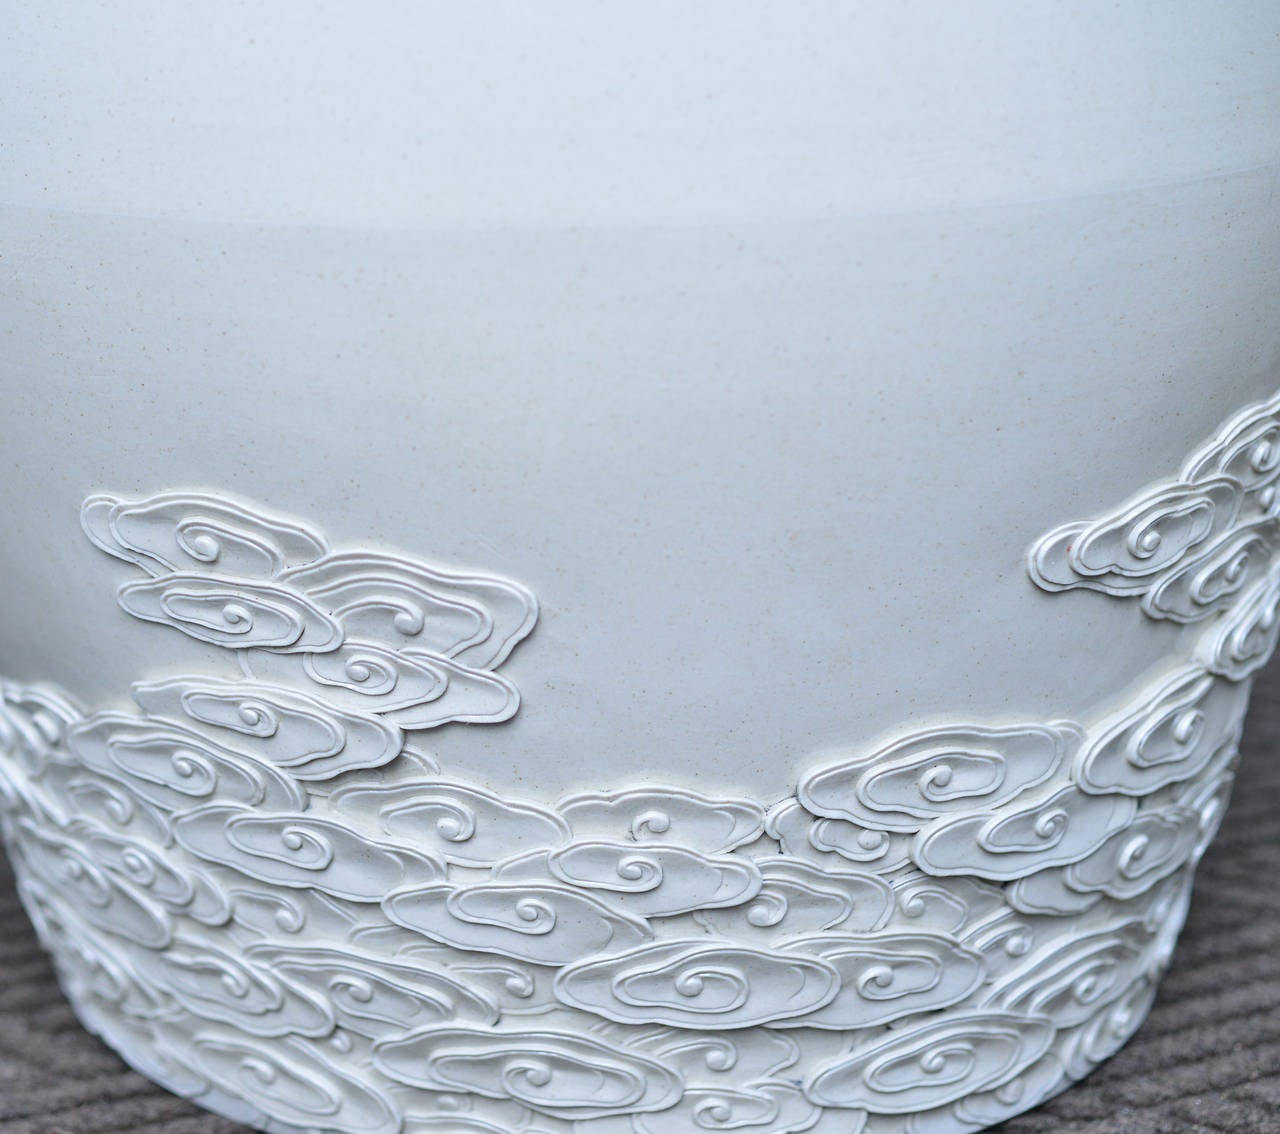 Pair of off-white porcelain stools with finely carved cloud decoration at the lower composition.